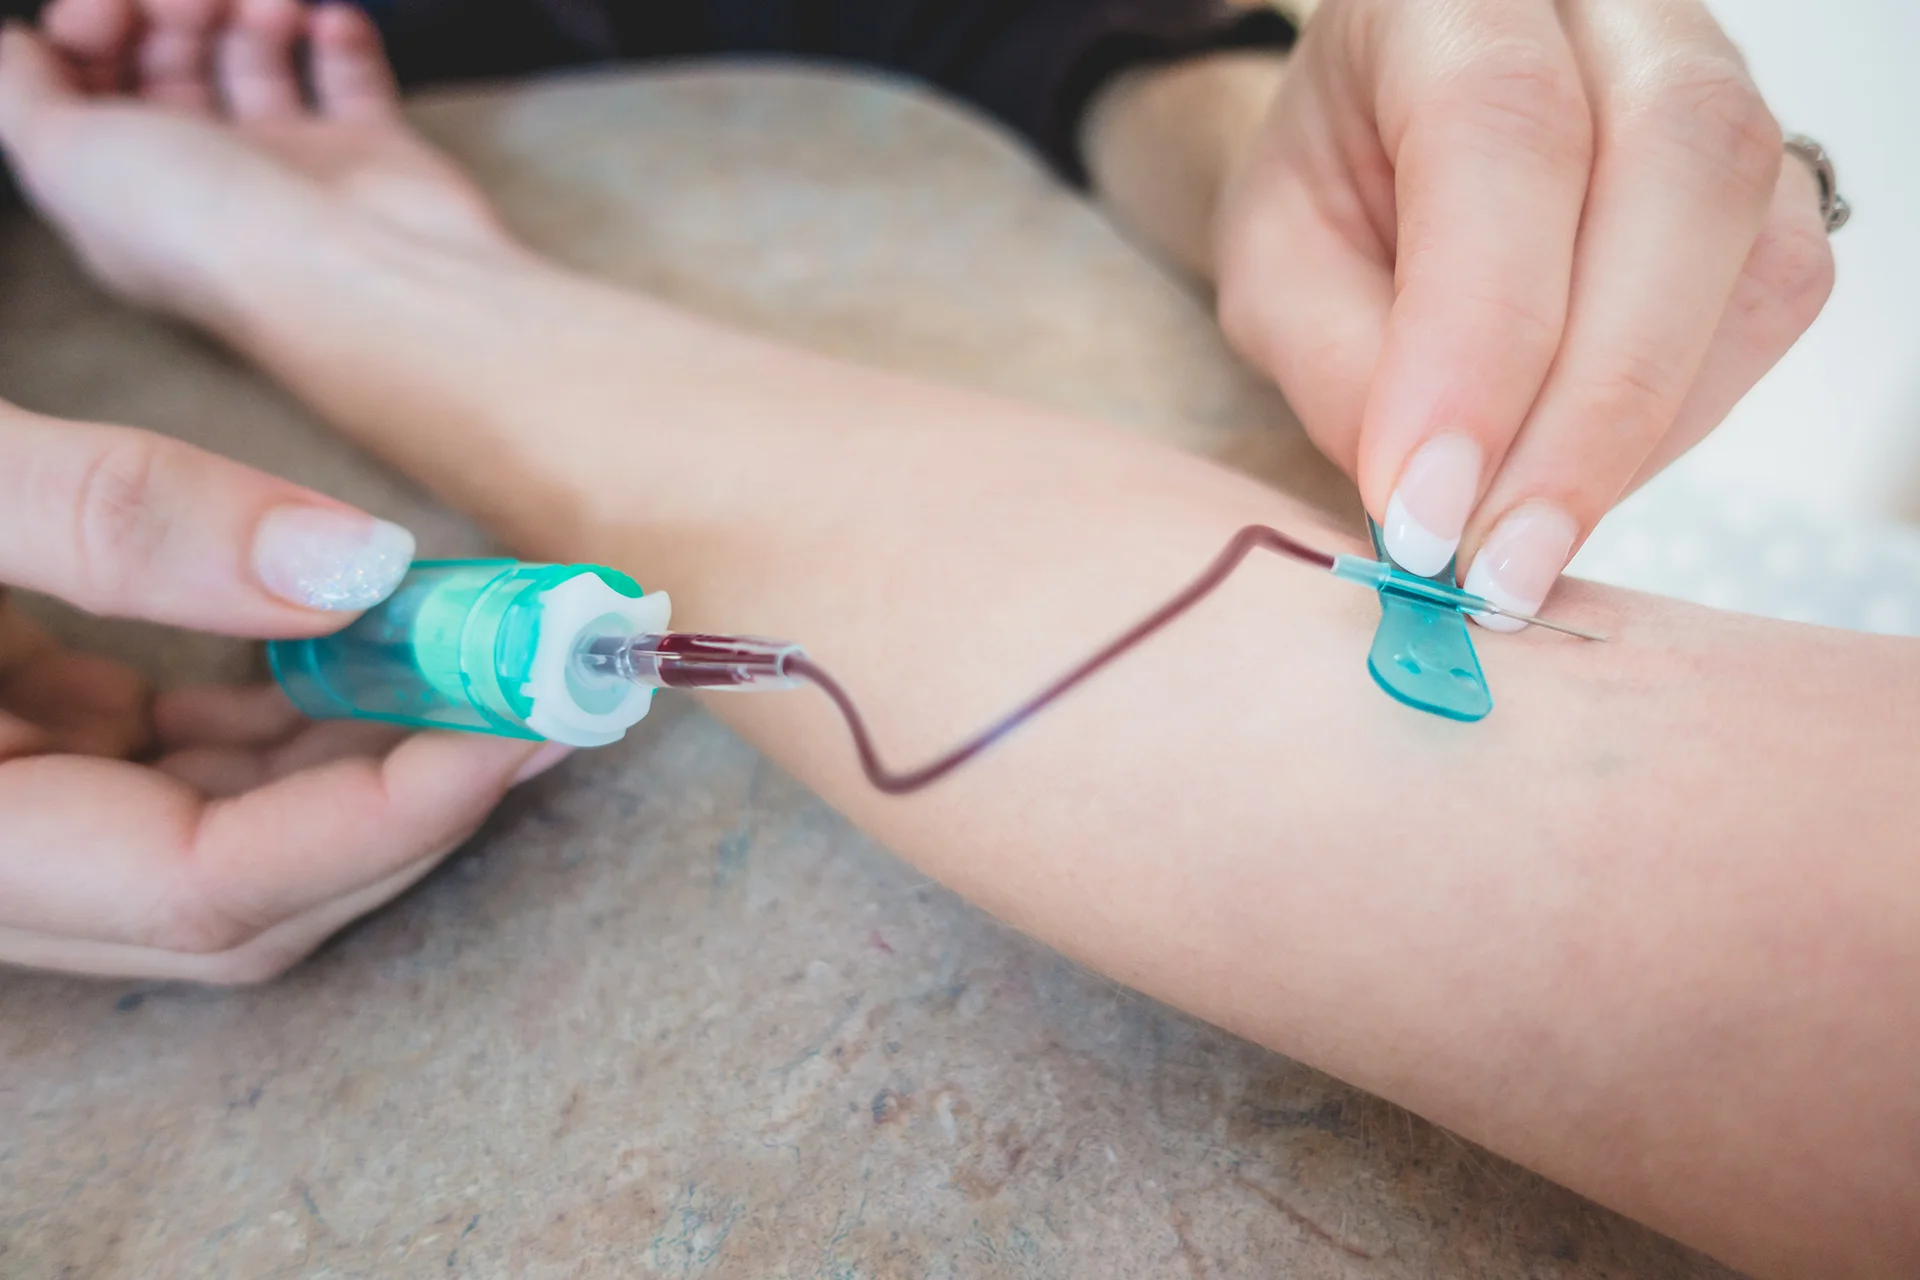 butterfly needle used in administering blood collection in a patient